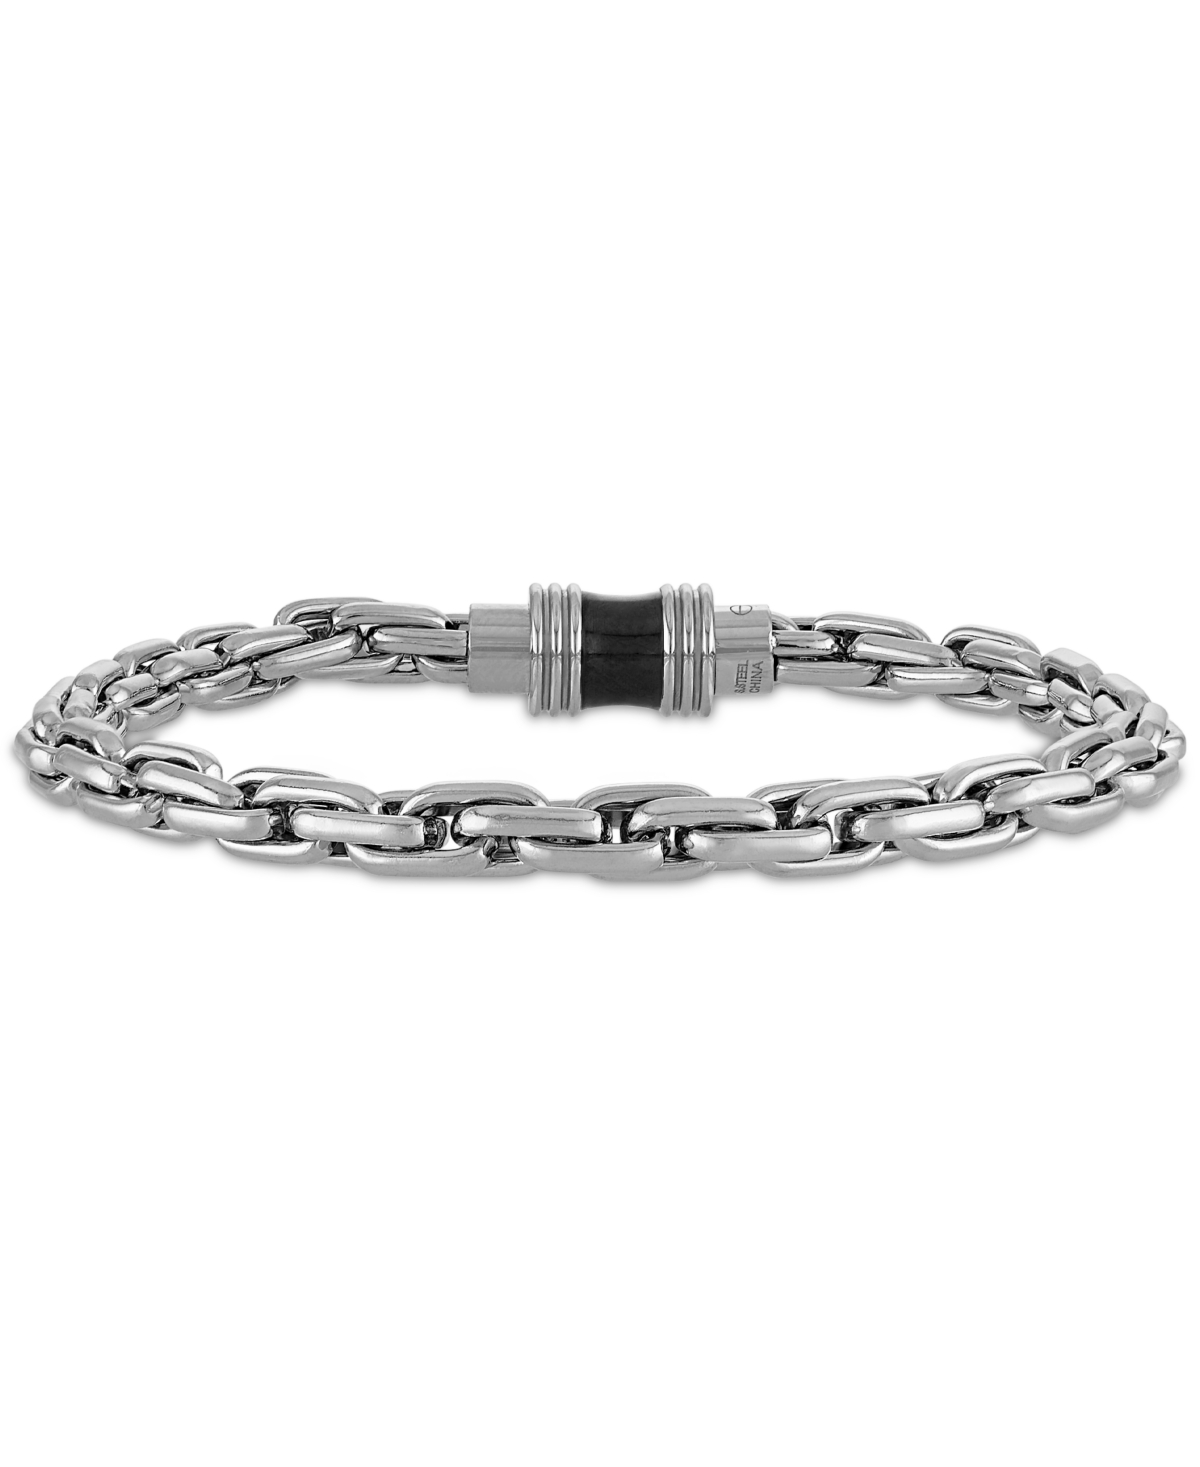 Shop Esquire Men's Jewelry Elongated Oval Link Chain Bracelet In Stainless Steel, Created For Macy's